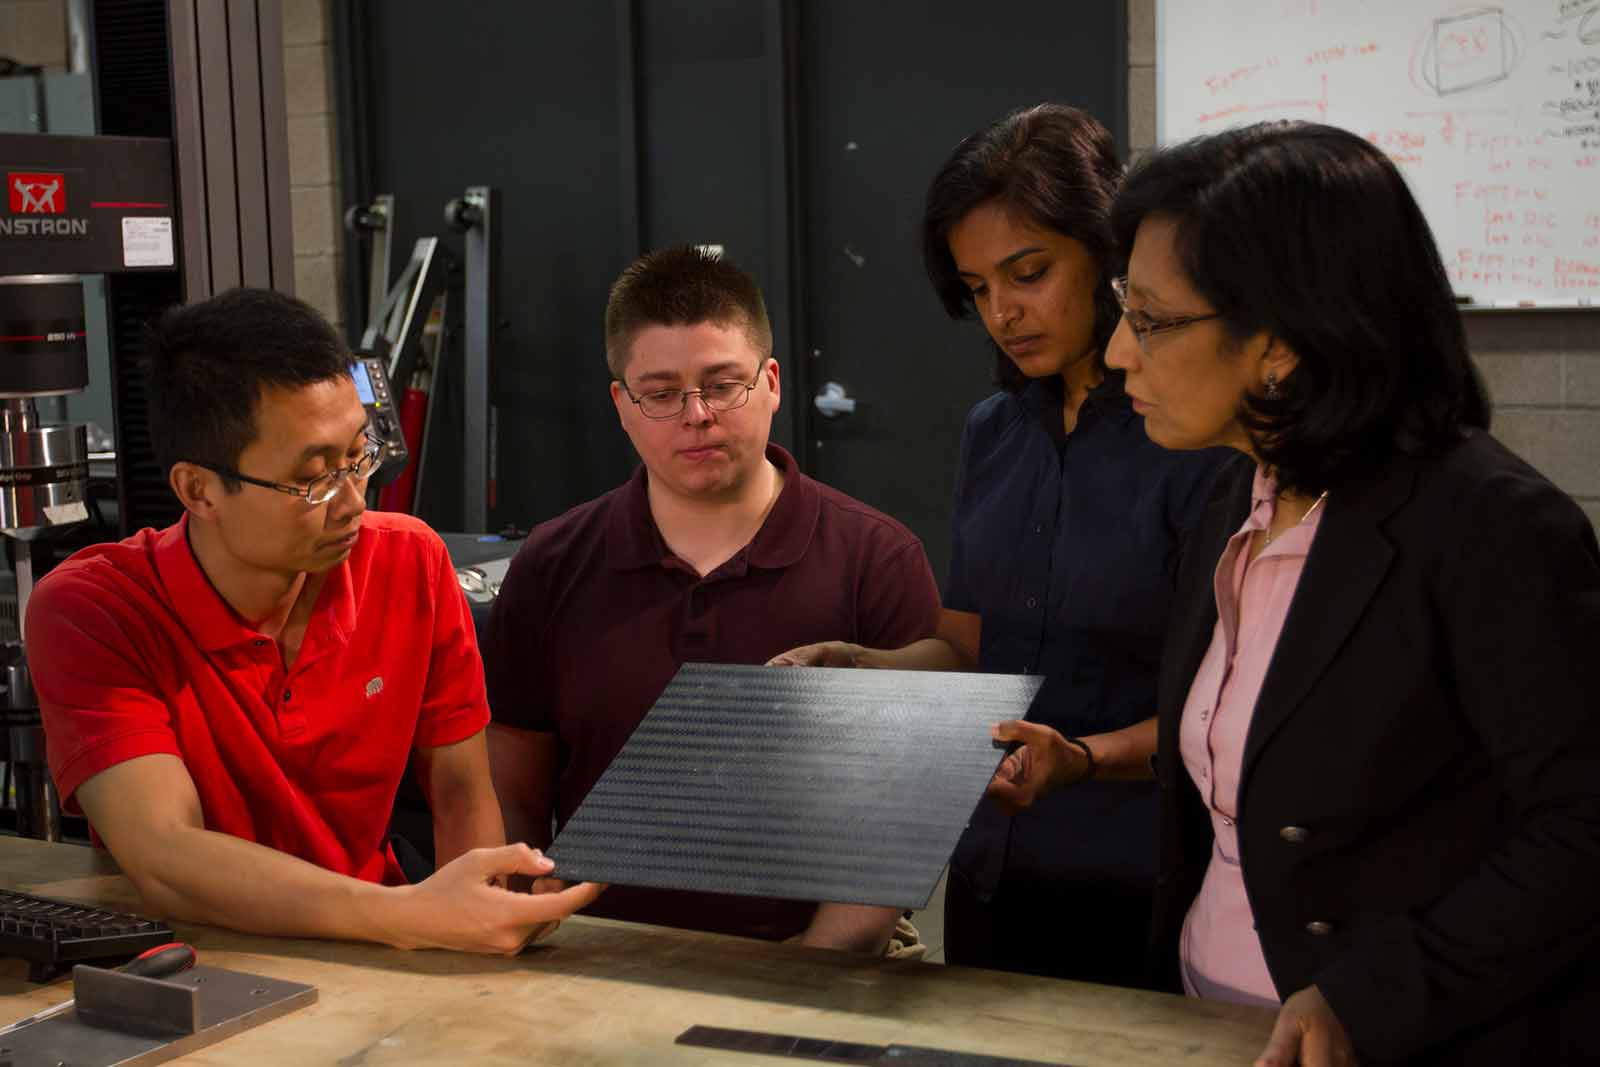 Aditi and a group of students look over materials